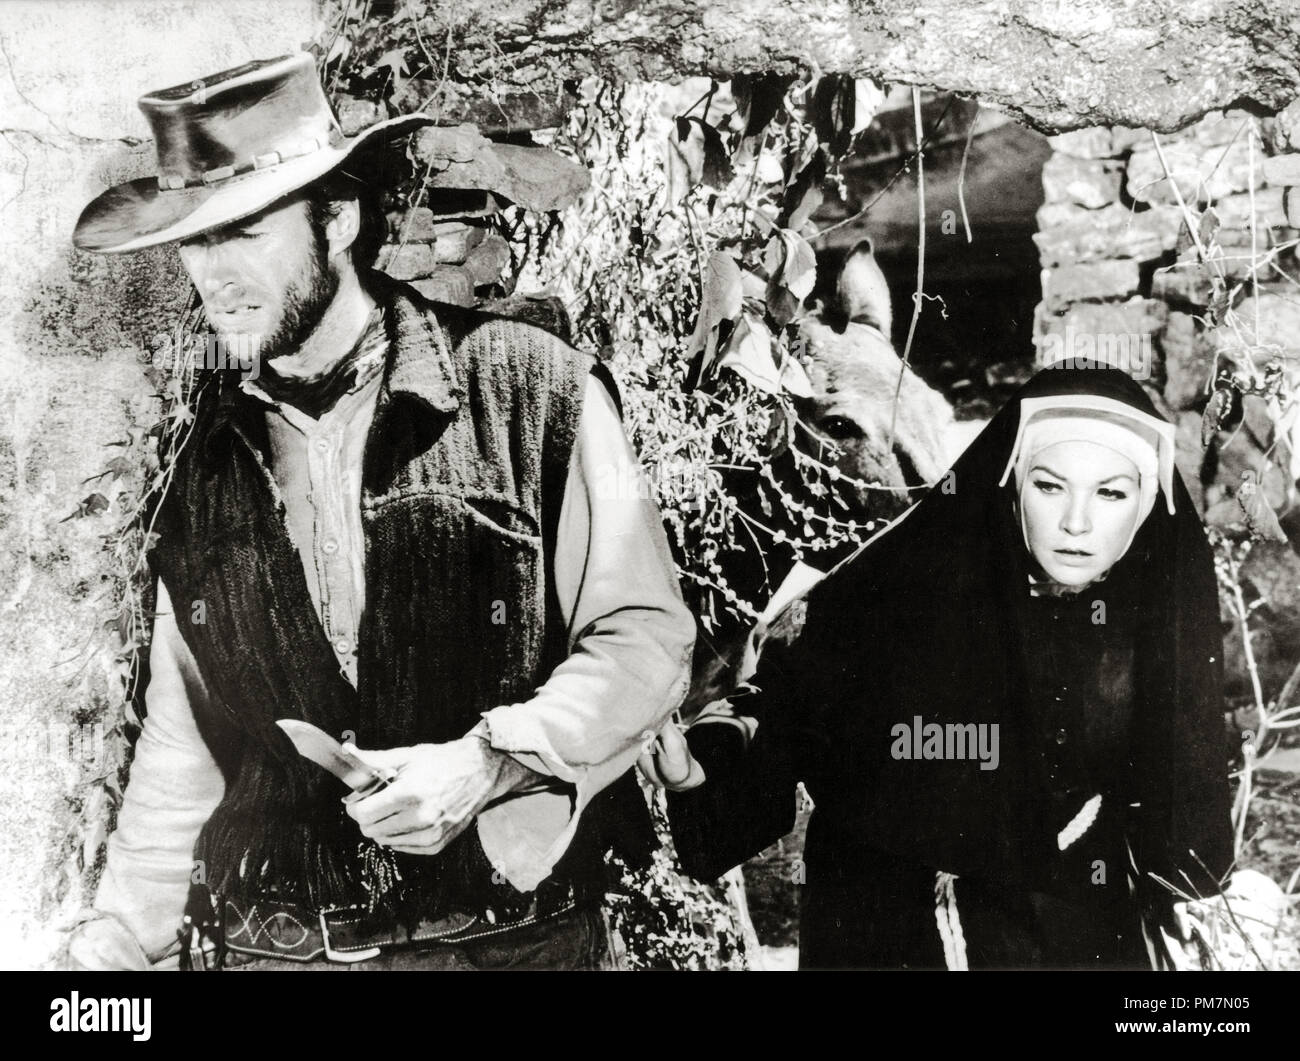 Clint Eastwood and Shirley MacLaine, "Two Mules for Sister Sara" 1970  Universal File Reference # 31202 583THA Stock Photo - Alamy